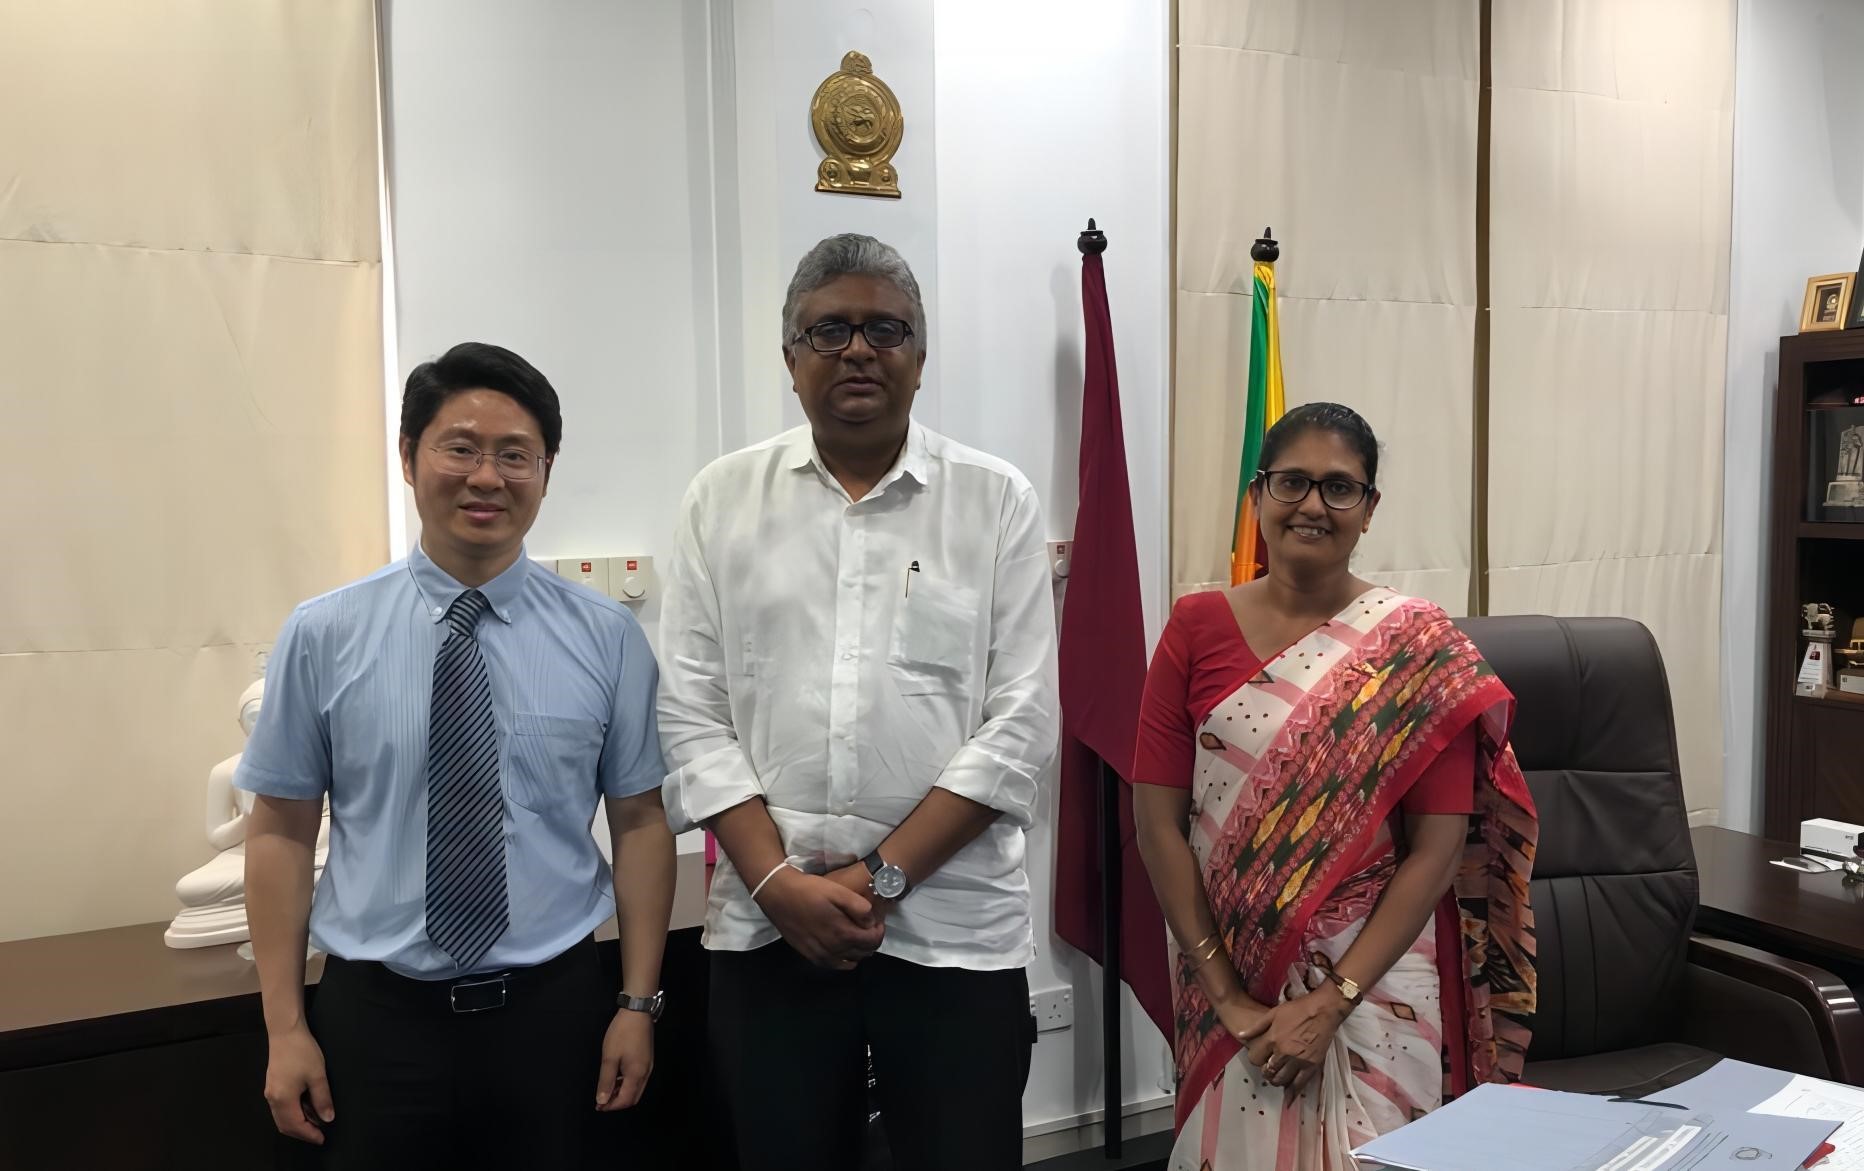 A Duo of Directors of the Confucius Institute at the University of Colombo (CIUC) visited the UGC Chairman